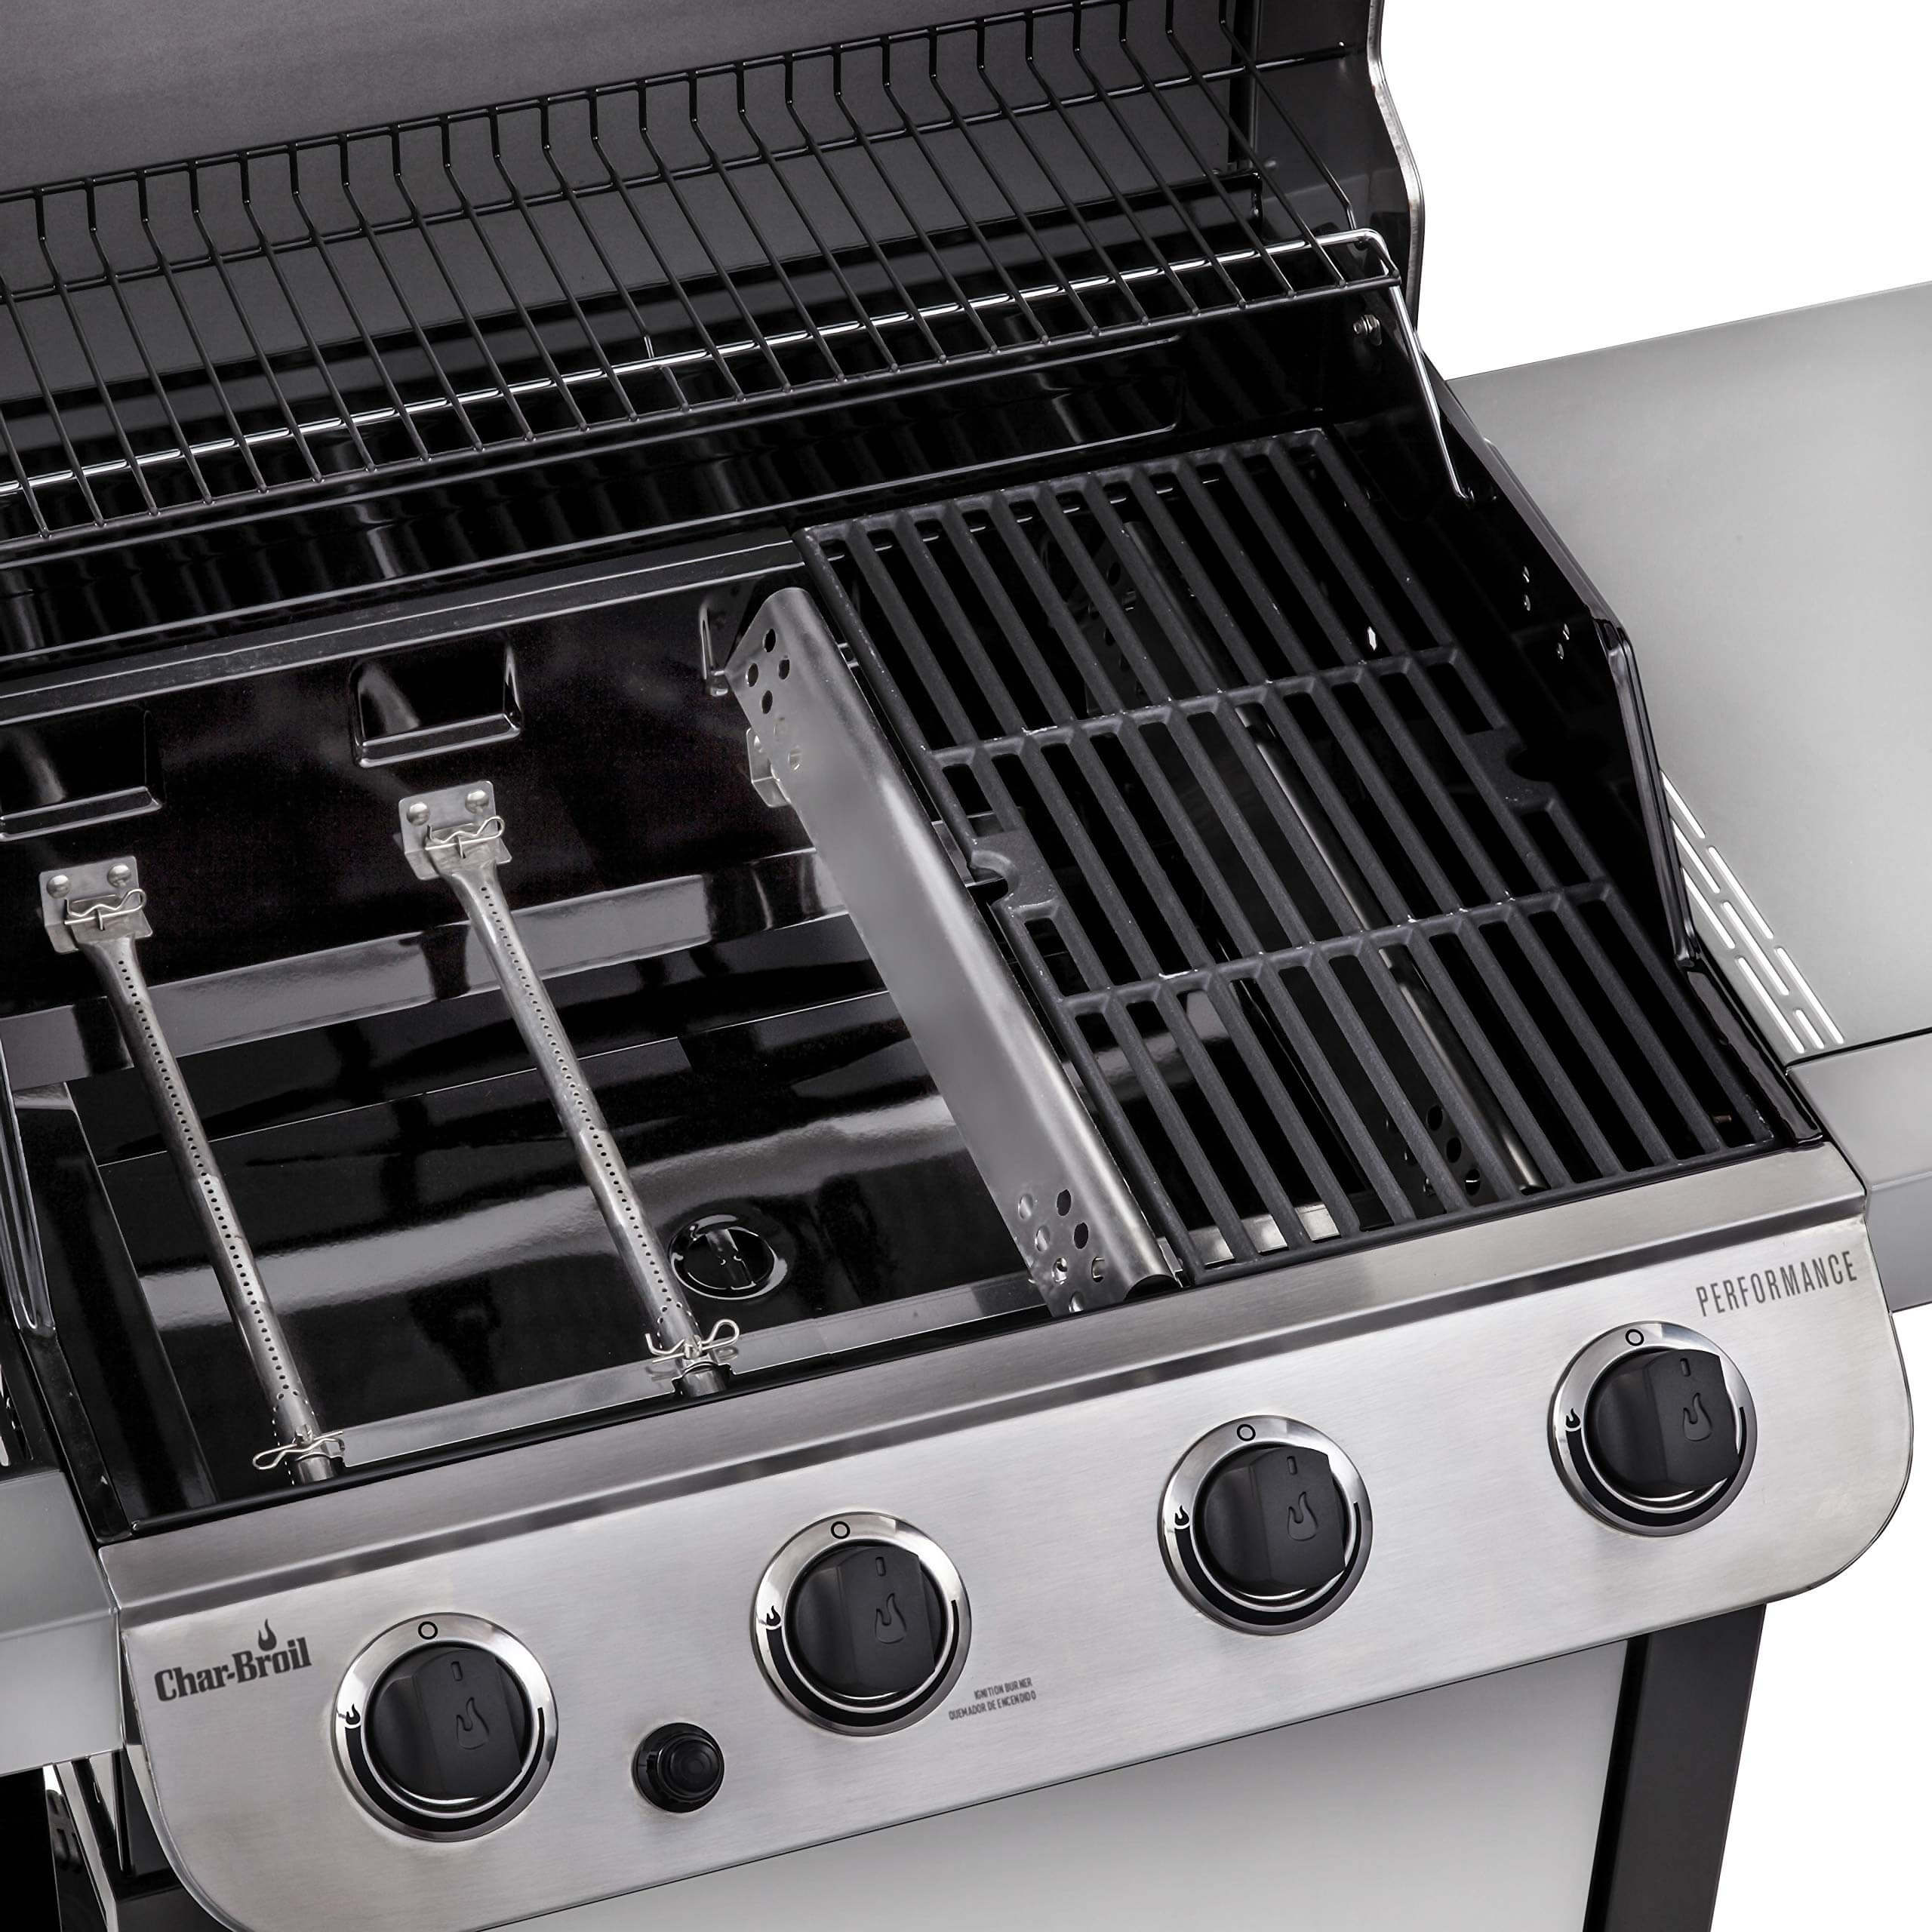 char broil 4 burner gas grill reviews, best gas grills under 500